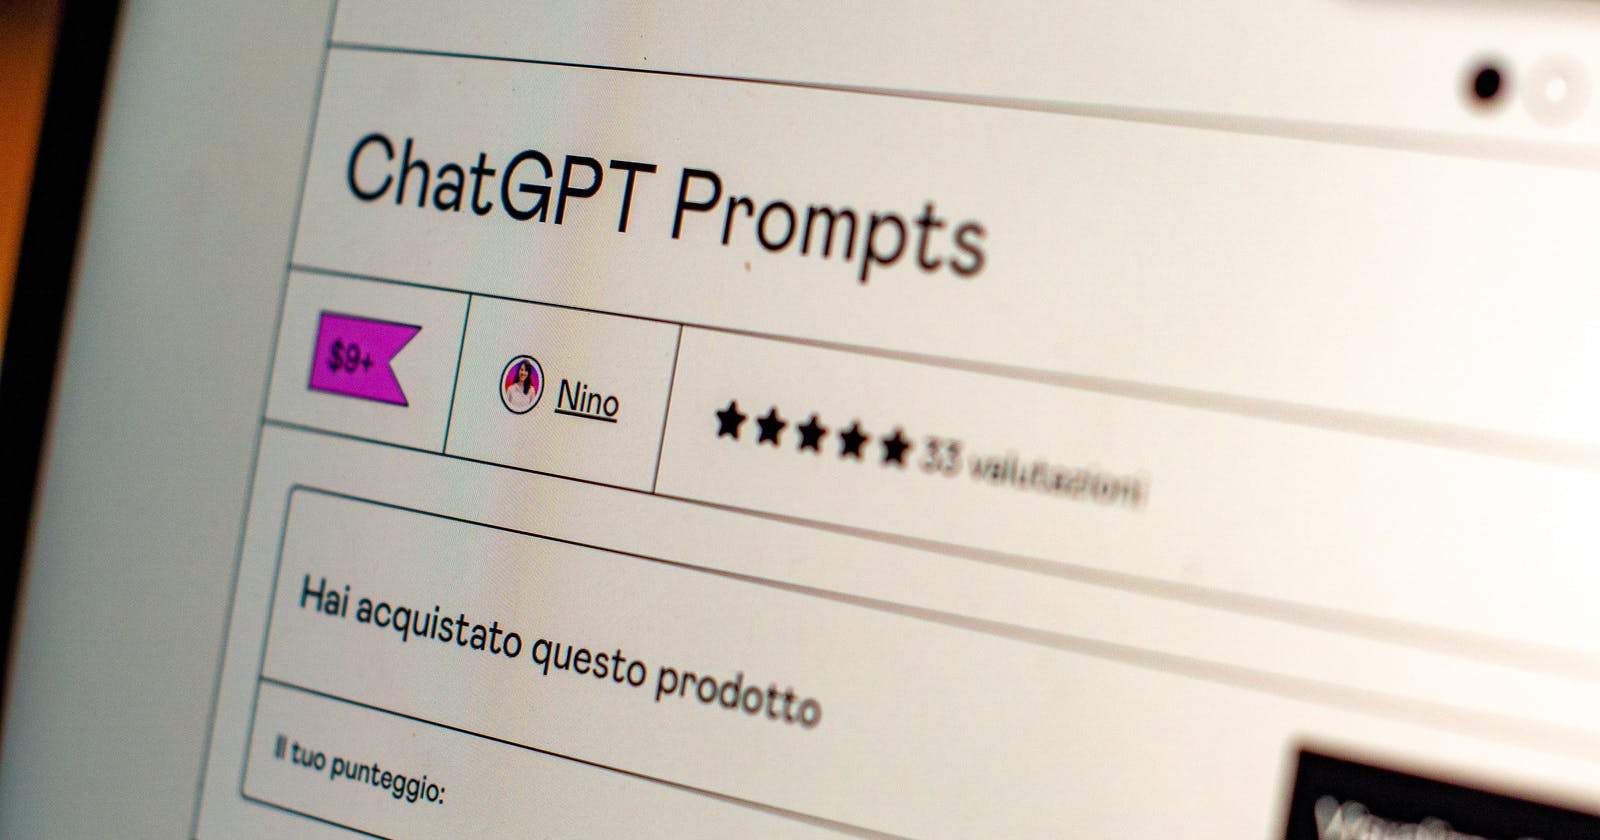 50 Chat GPT Prompts Every Software Developer Should Know